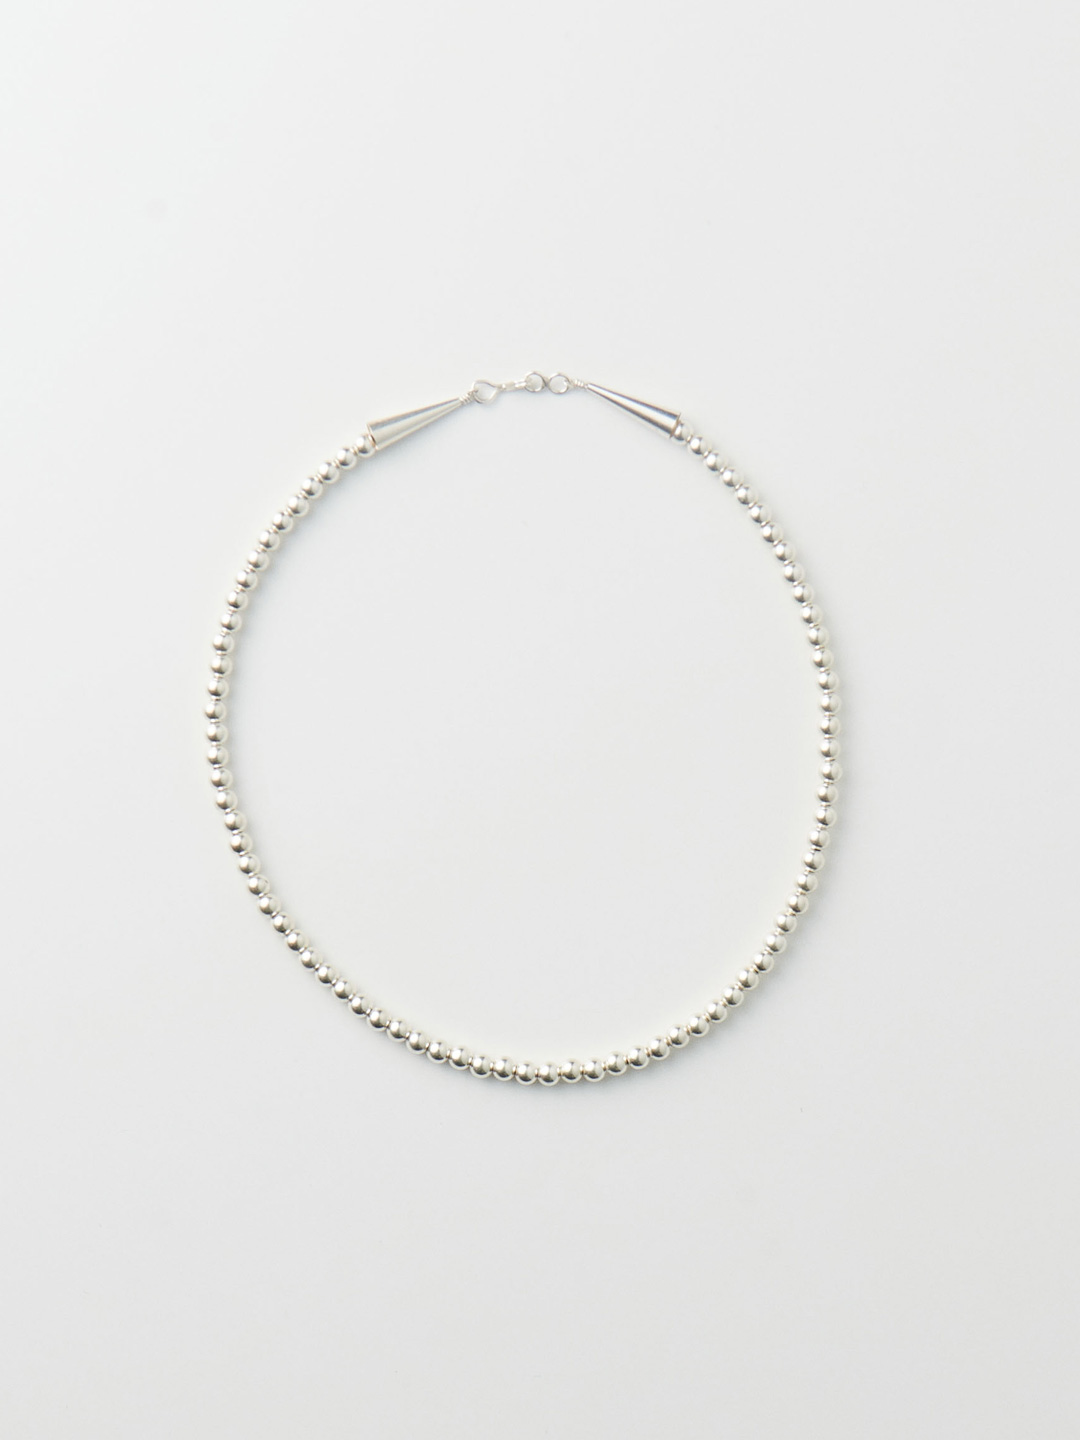 5mm Ball Chain Necklace 40.5cm - Silver